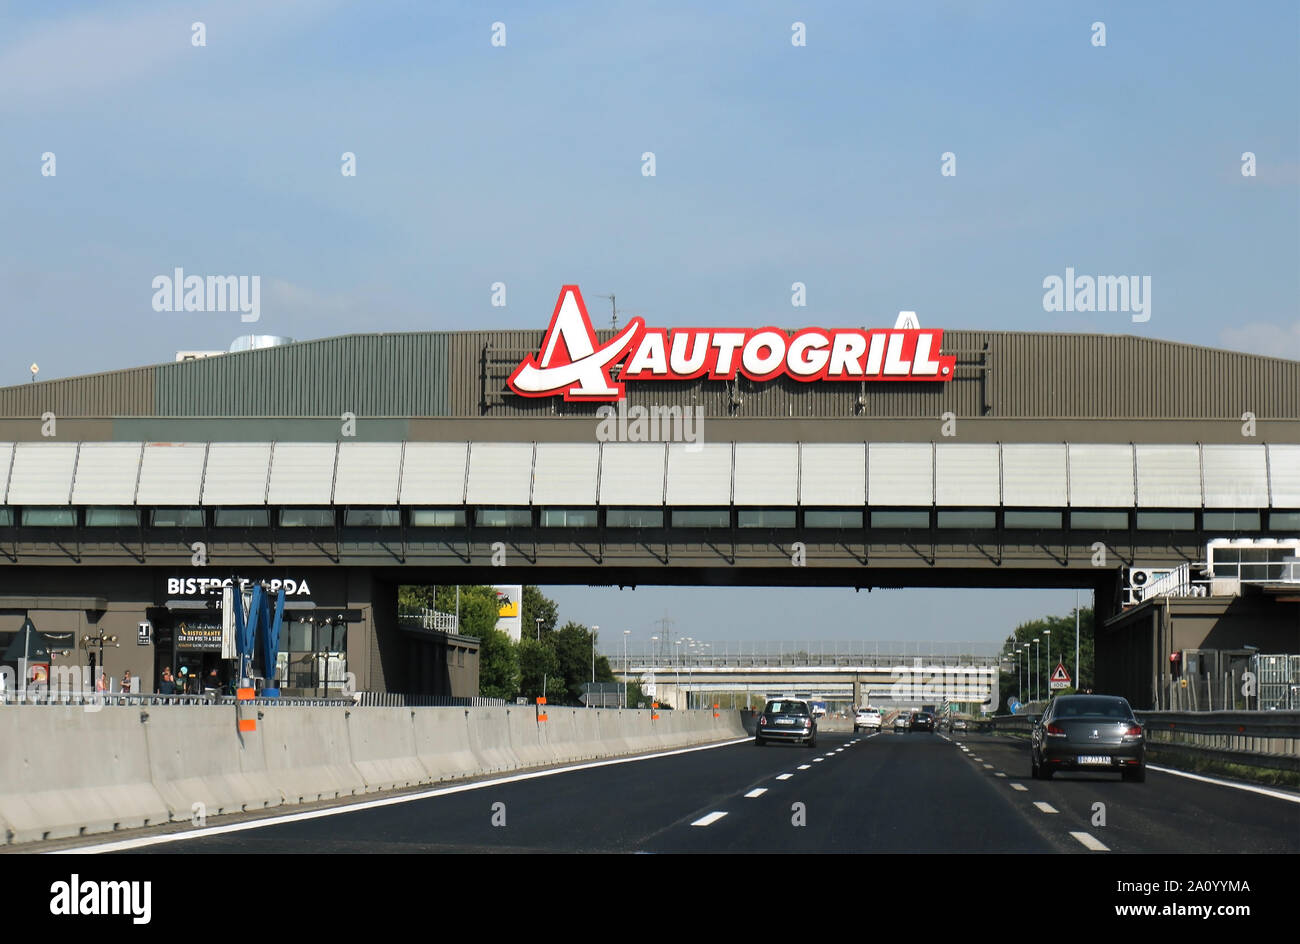 Milan, Italy - June 15, 2019: Highway on the way to Milan with cars on both sides of freeway and Autogrill restaurant with logo across on overlay brid Stock Photo